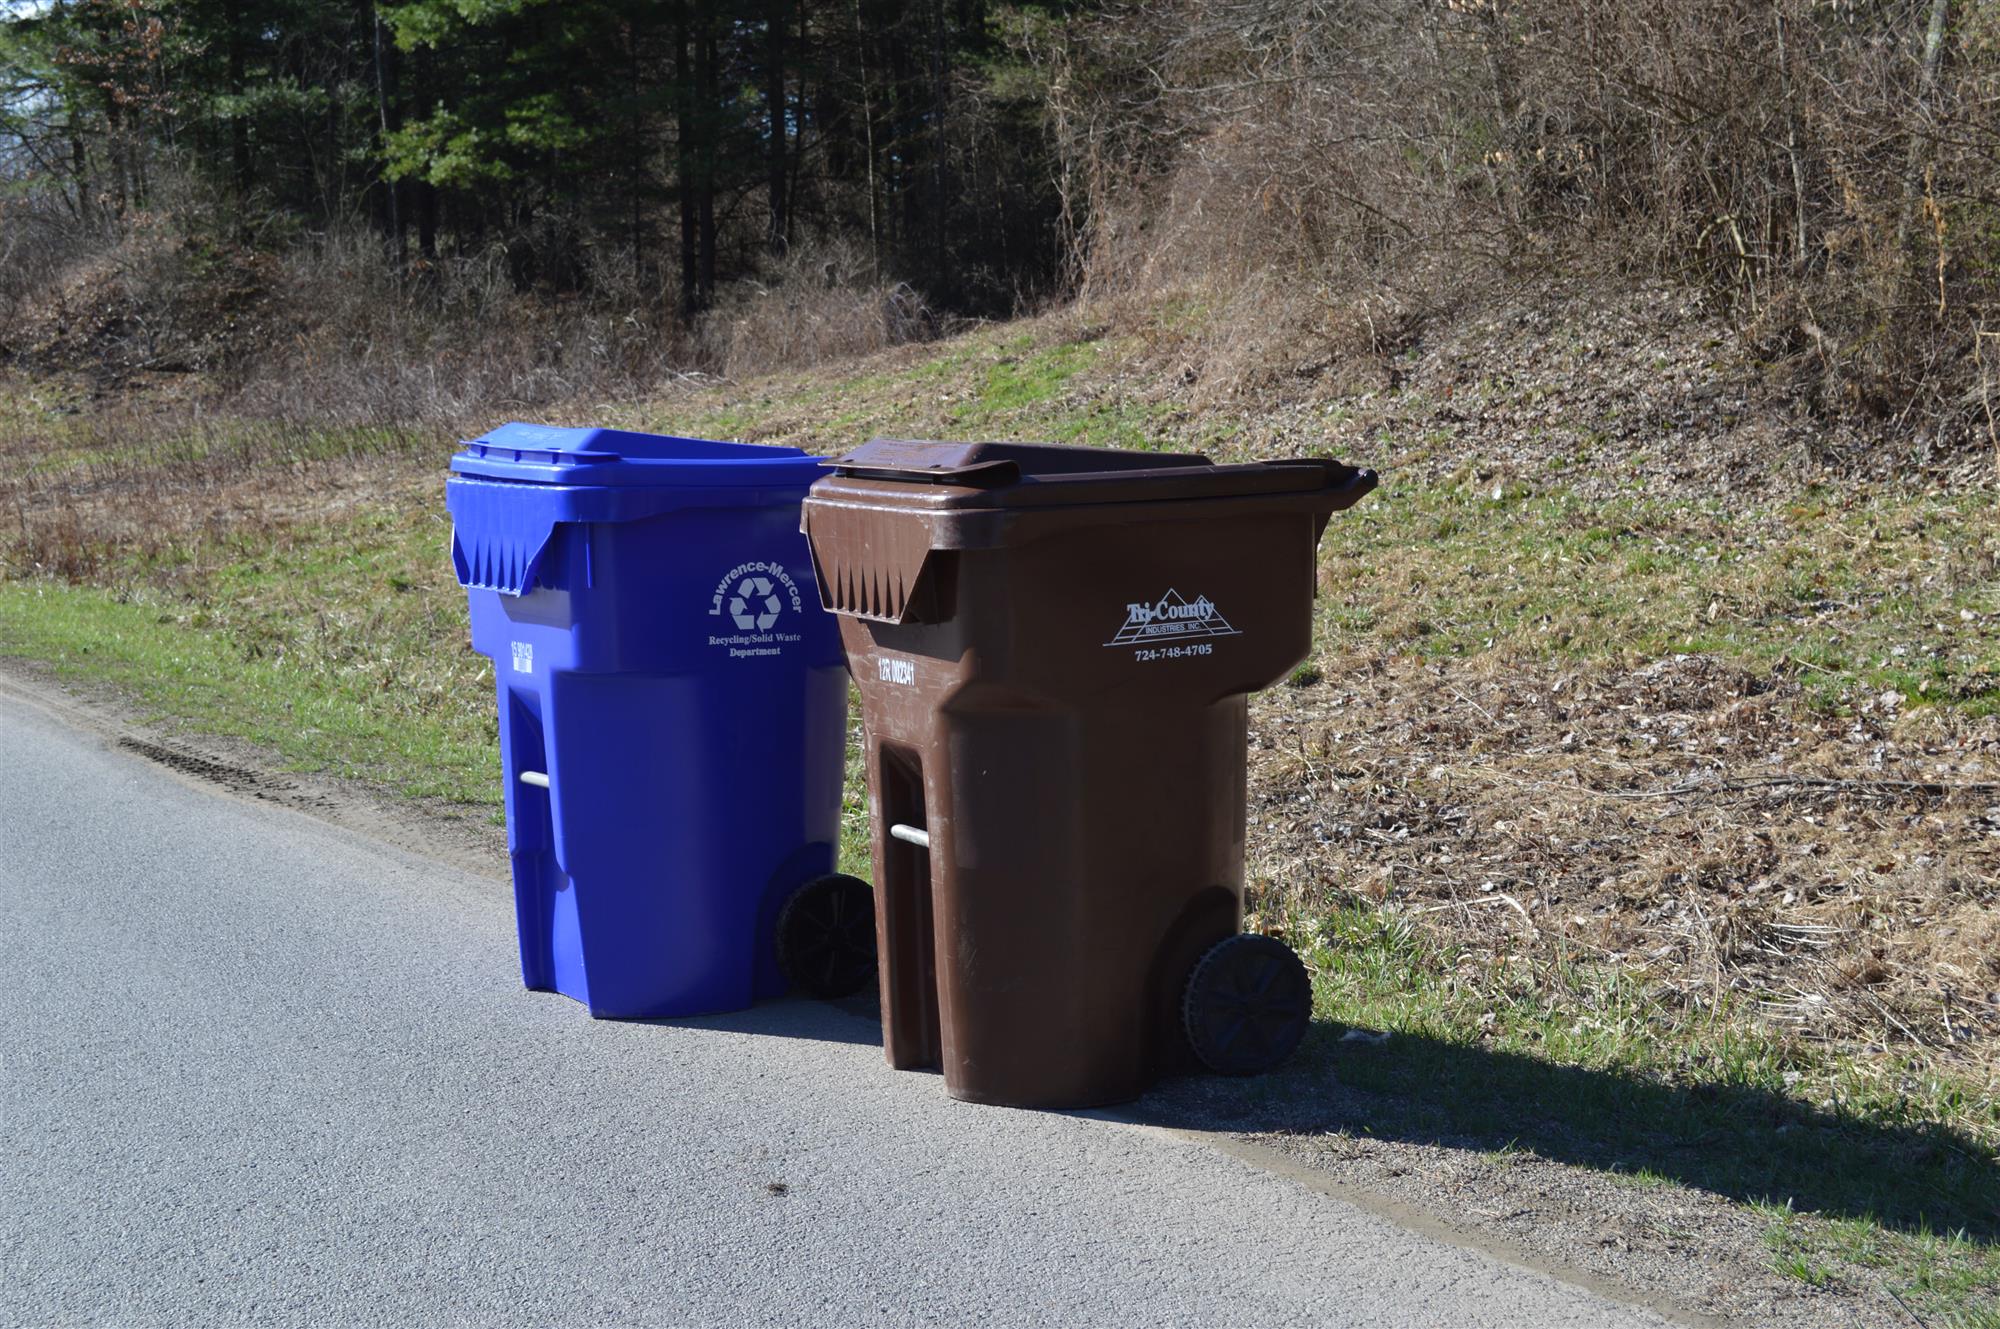 Basic How-To Tips for Garbage Collection